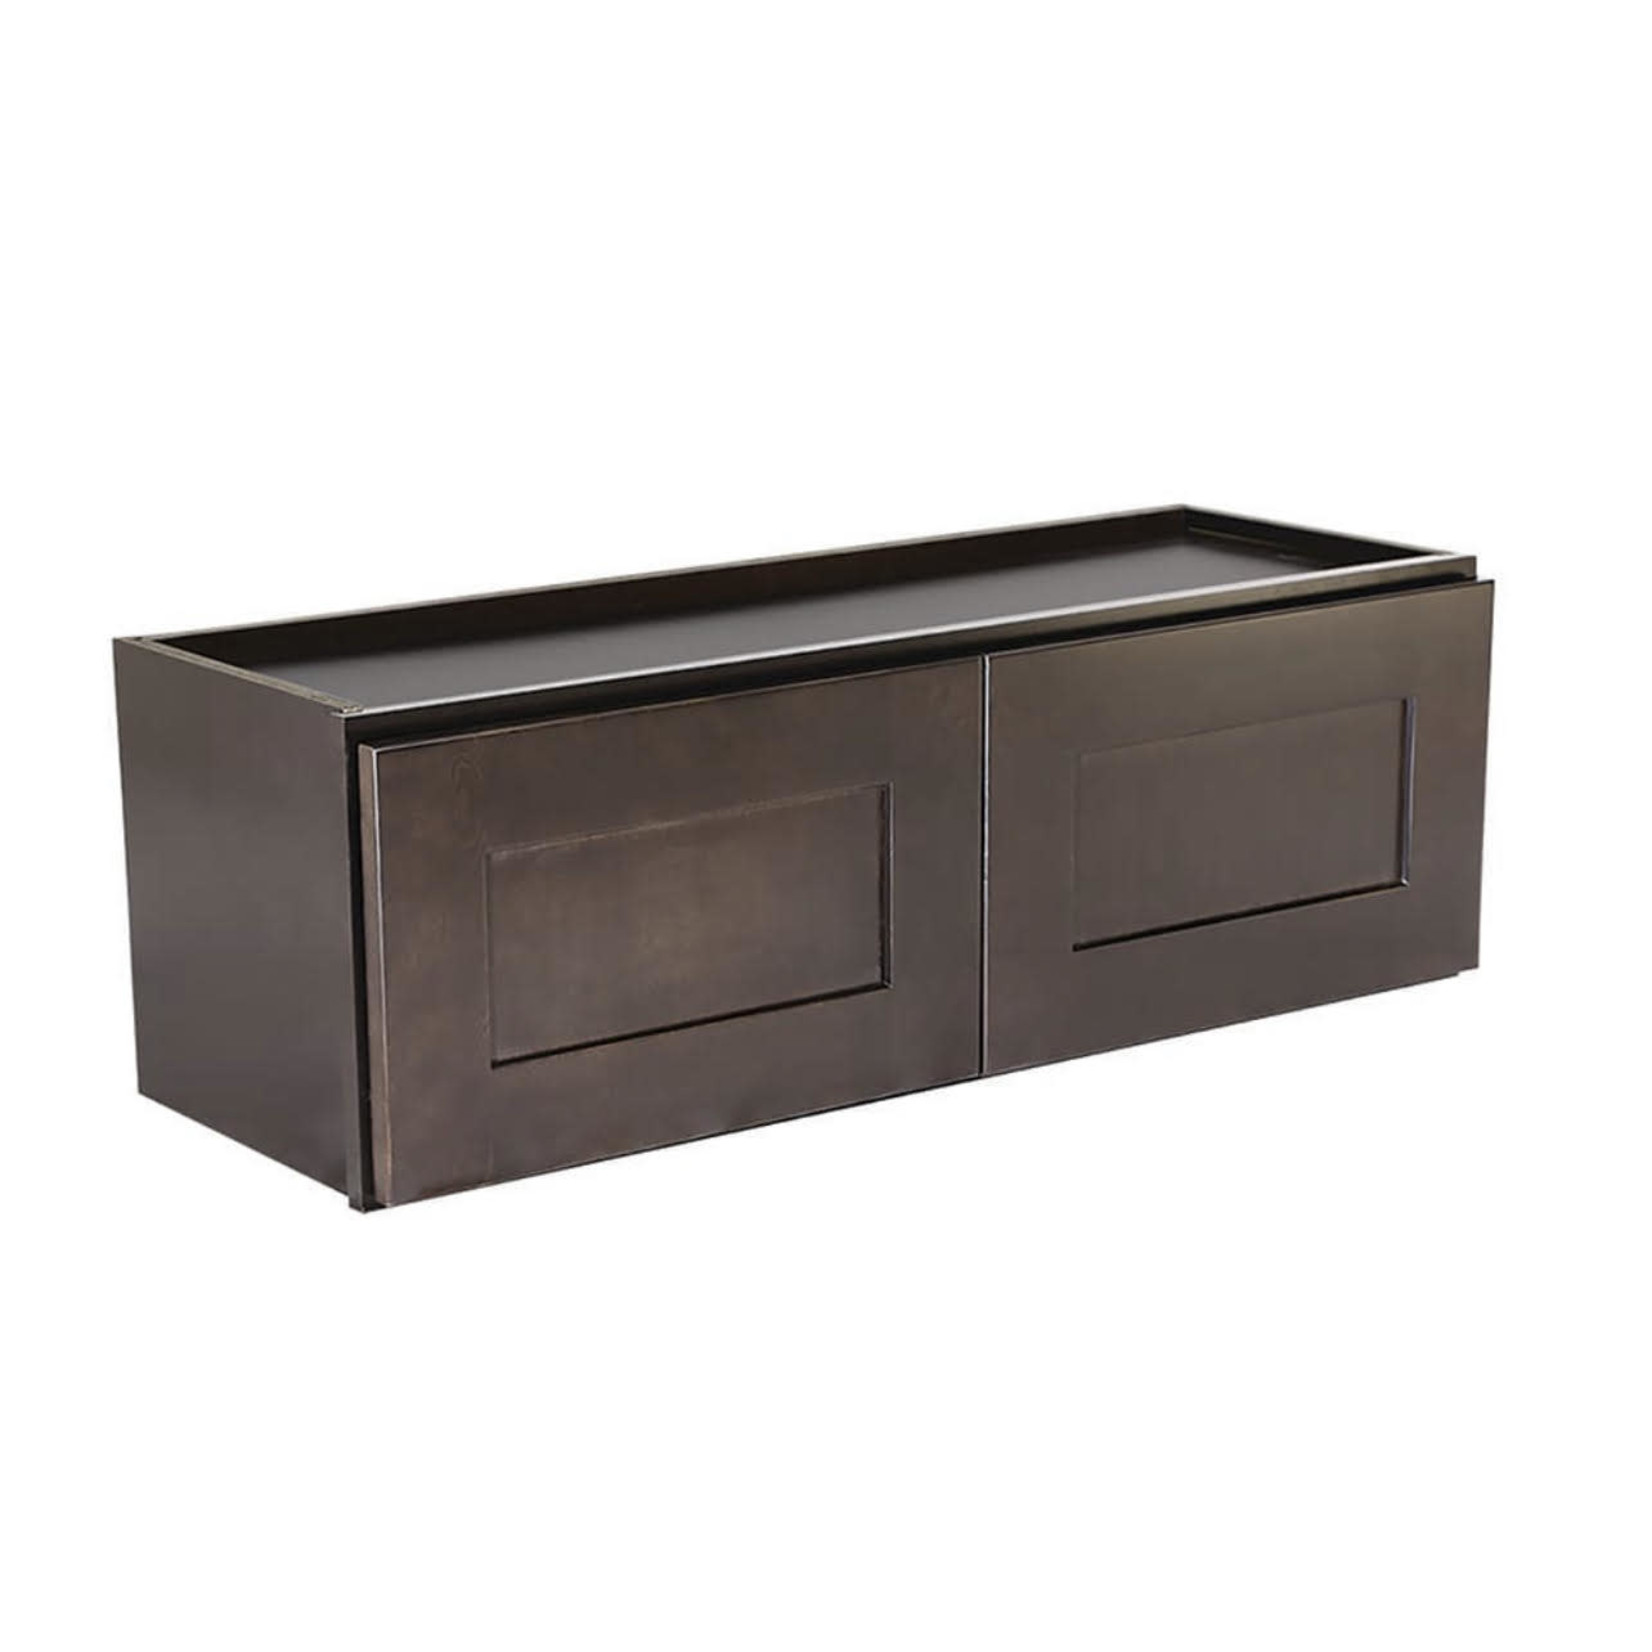 12324 Design House Upper Wall Cabinet